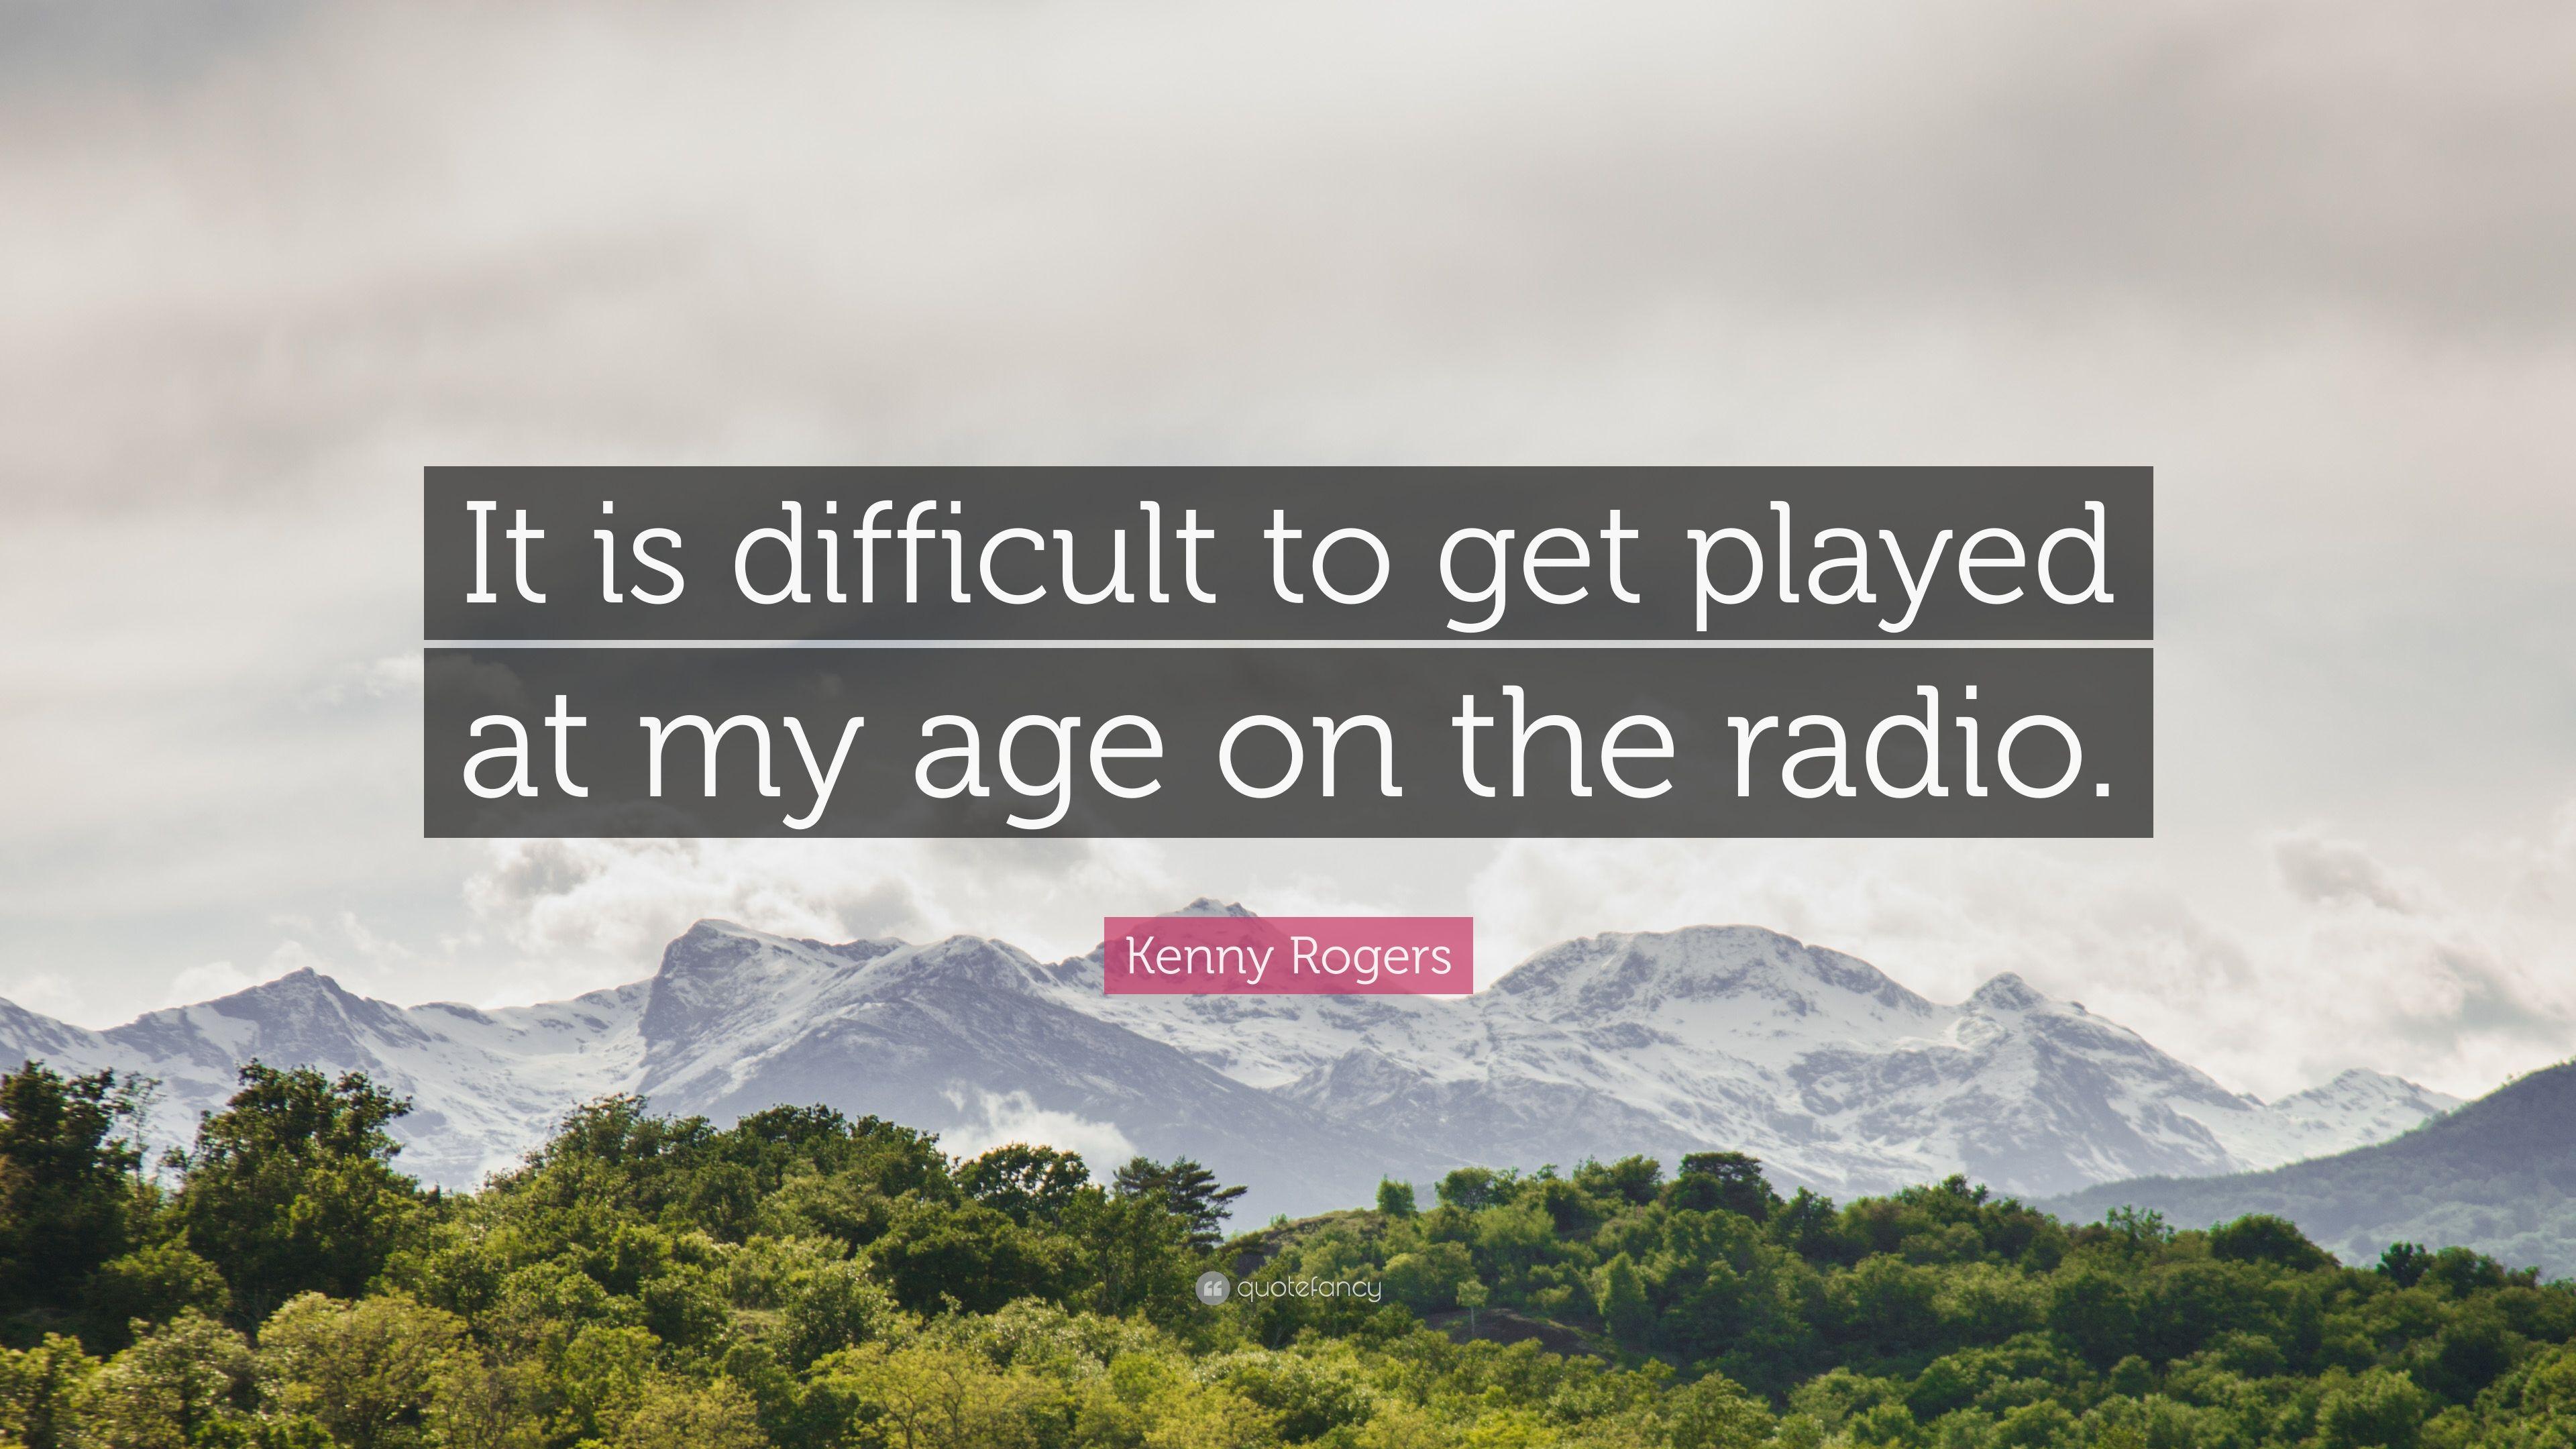 Kenny Rogers Quote: “It is difficult to get played at my age